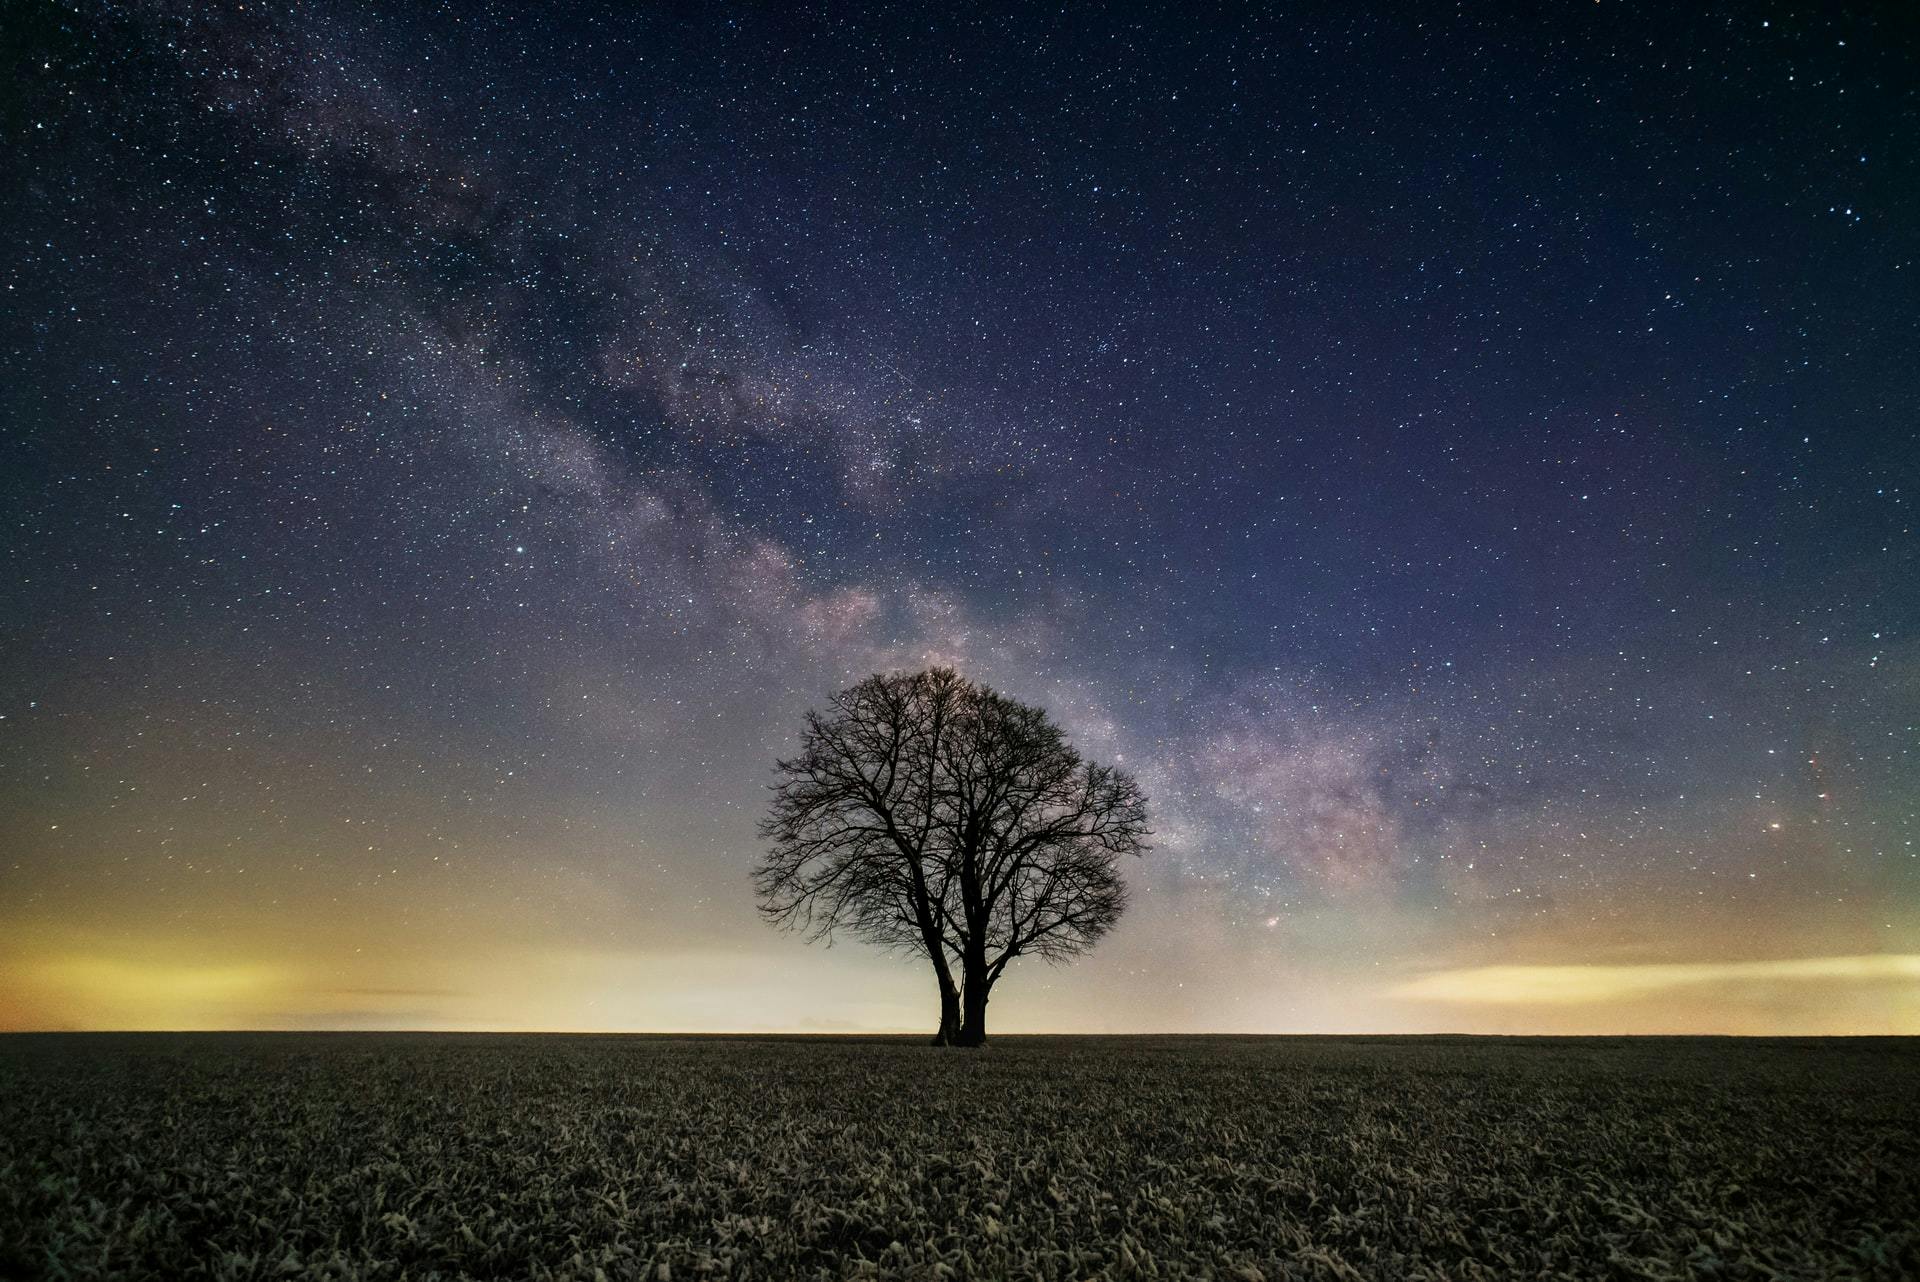 A picture of a tree at nighttime